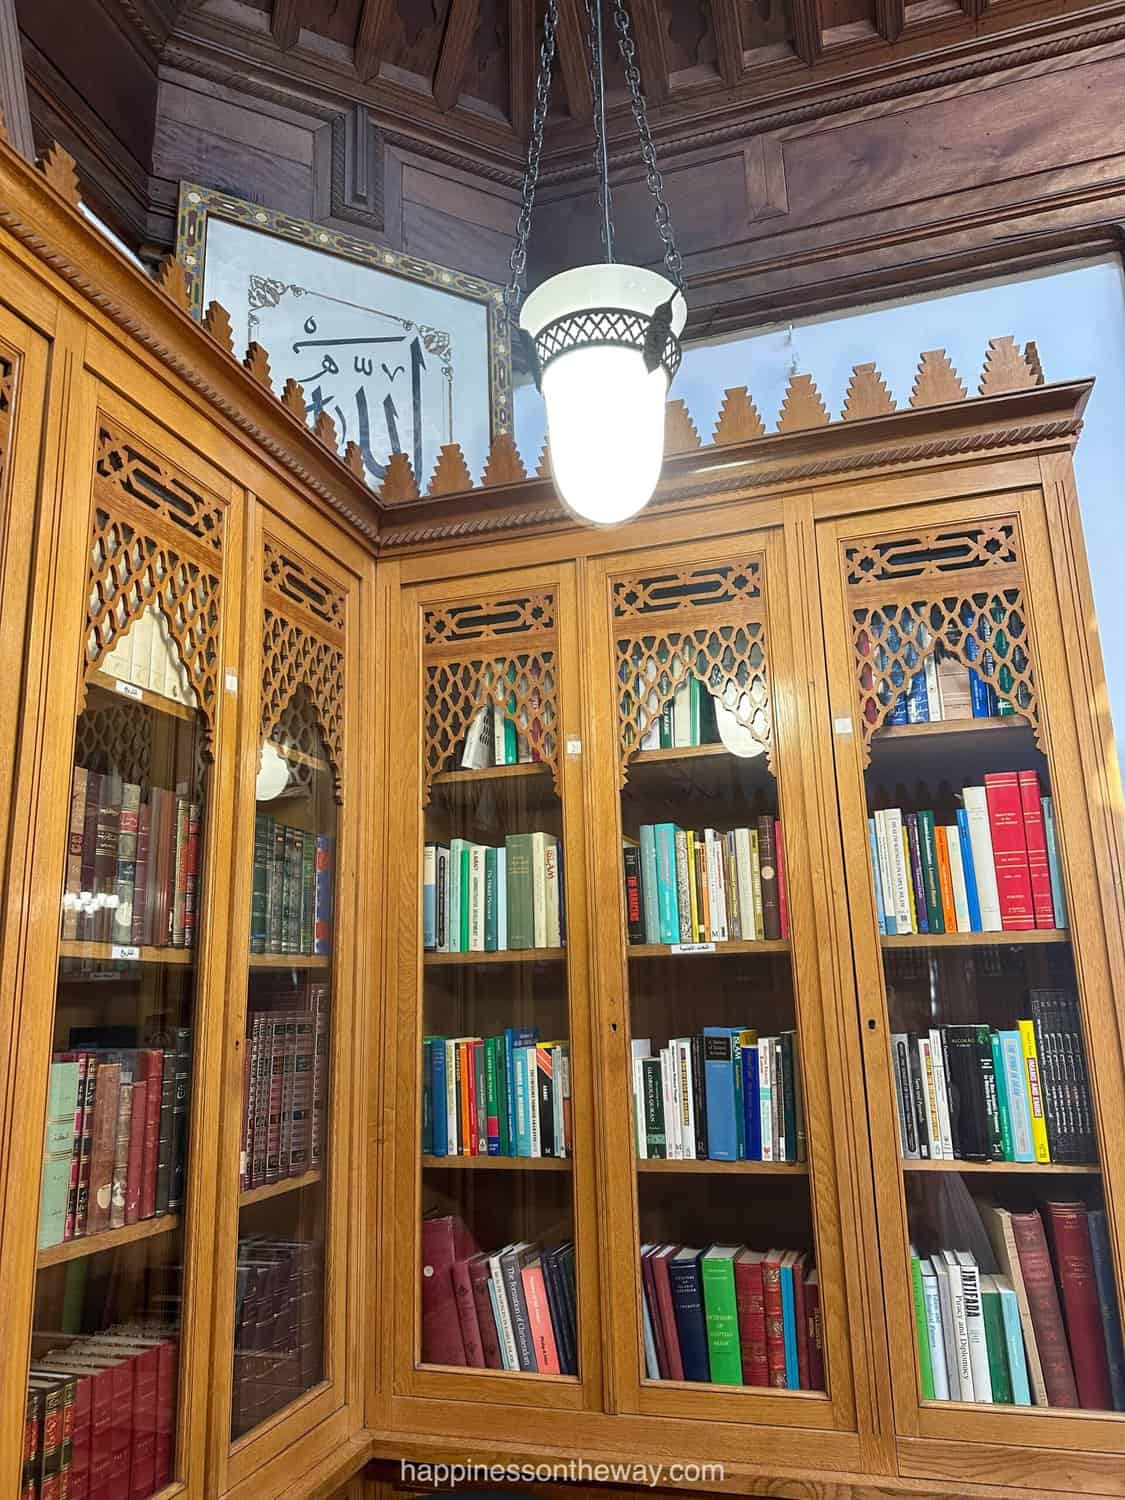 Bookshelves filled with thousands of books in the library of the Great Mosque of Paris.